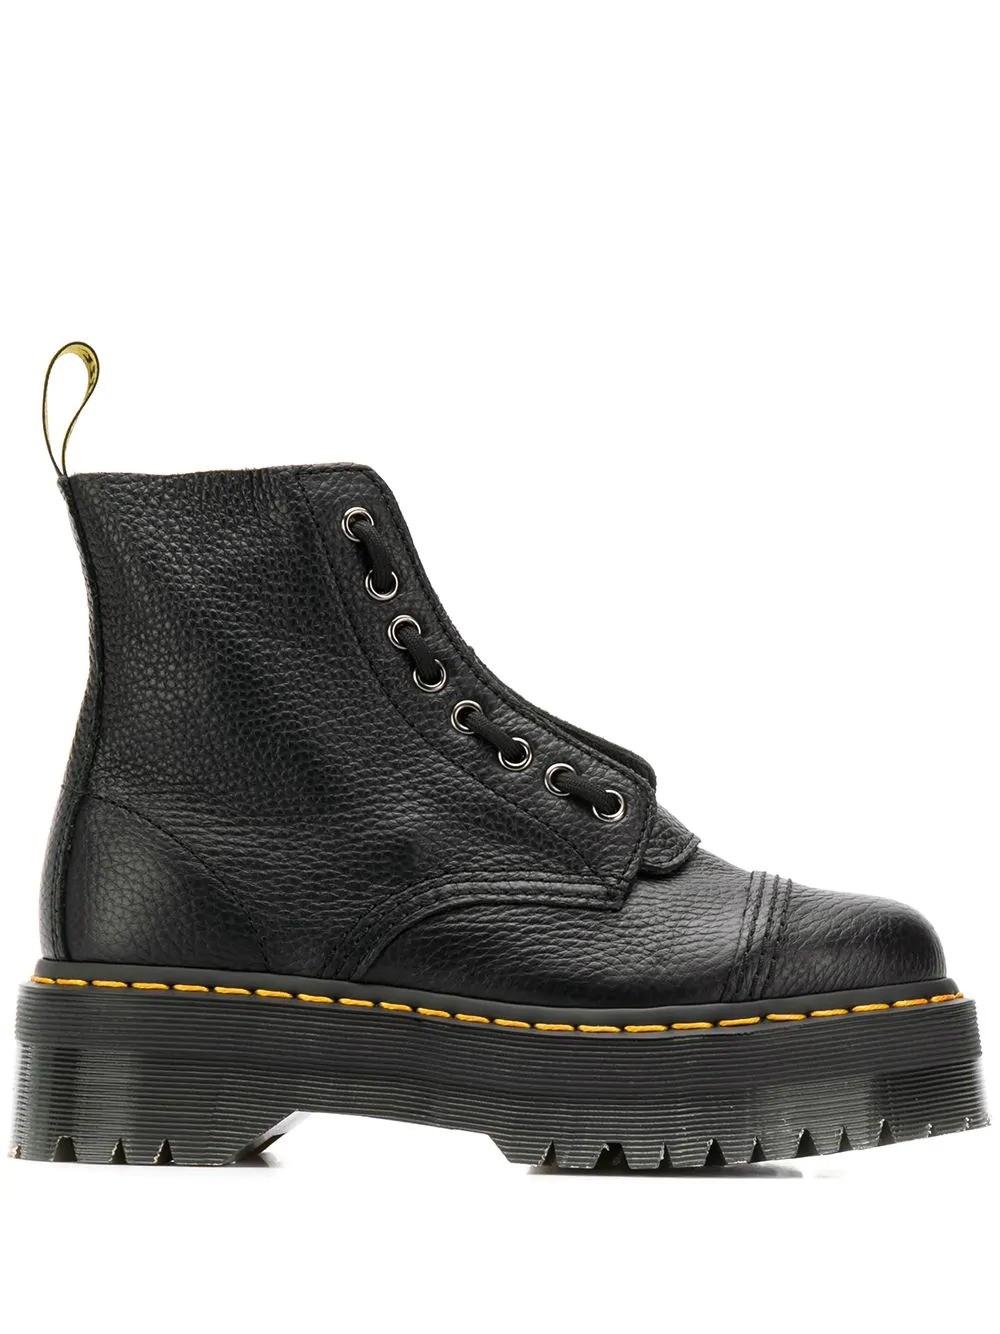 Dr. Martens Leather Sinclair Boots in Black - Lyst